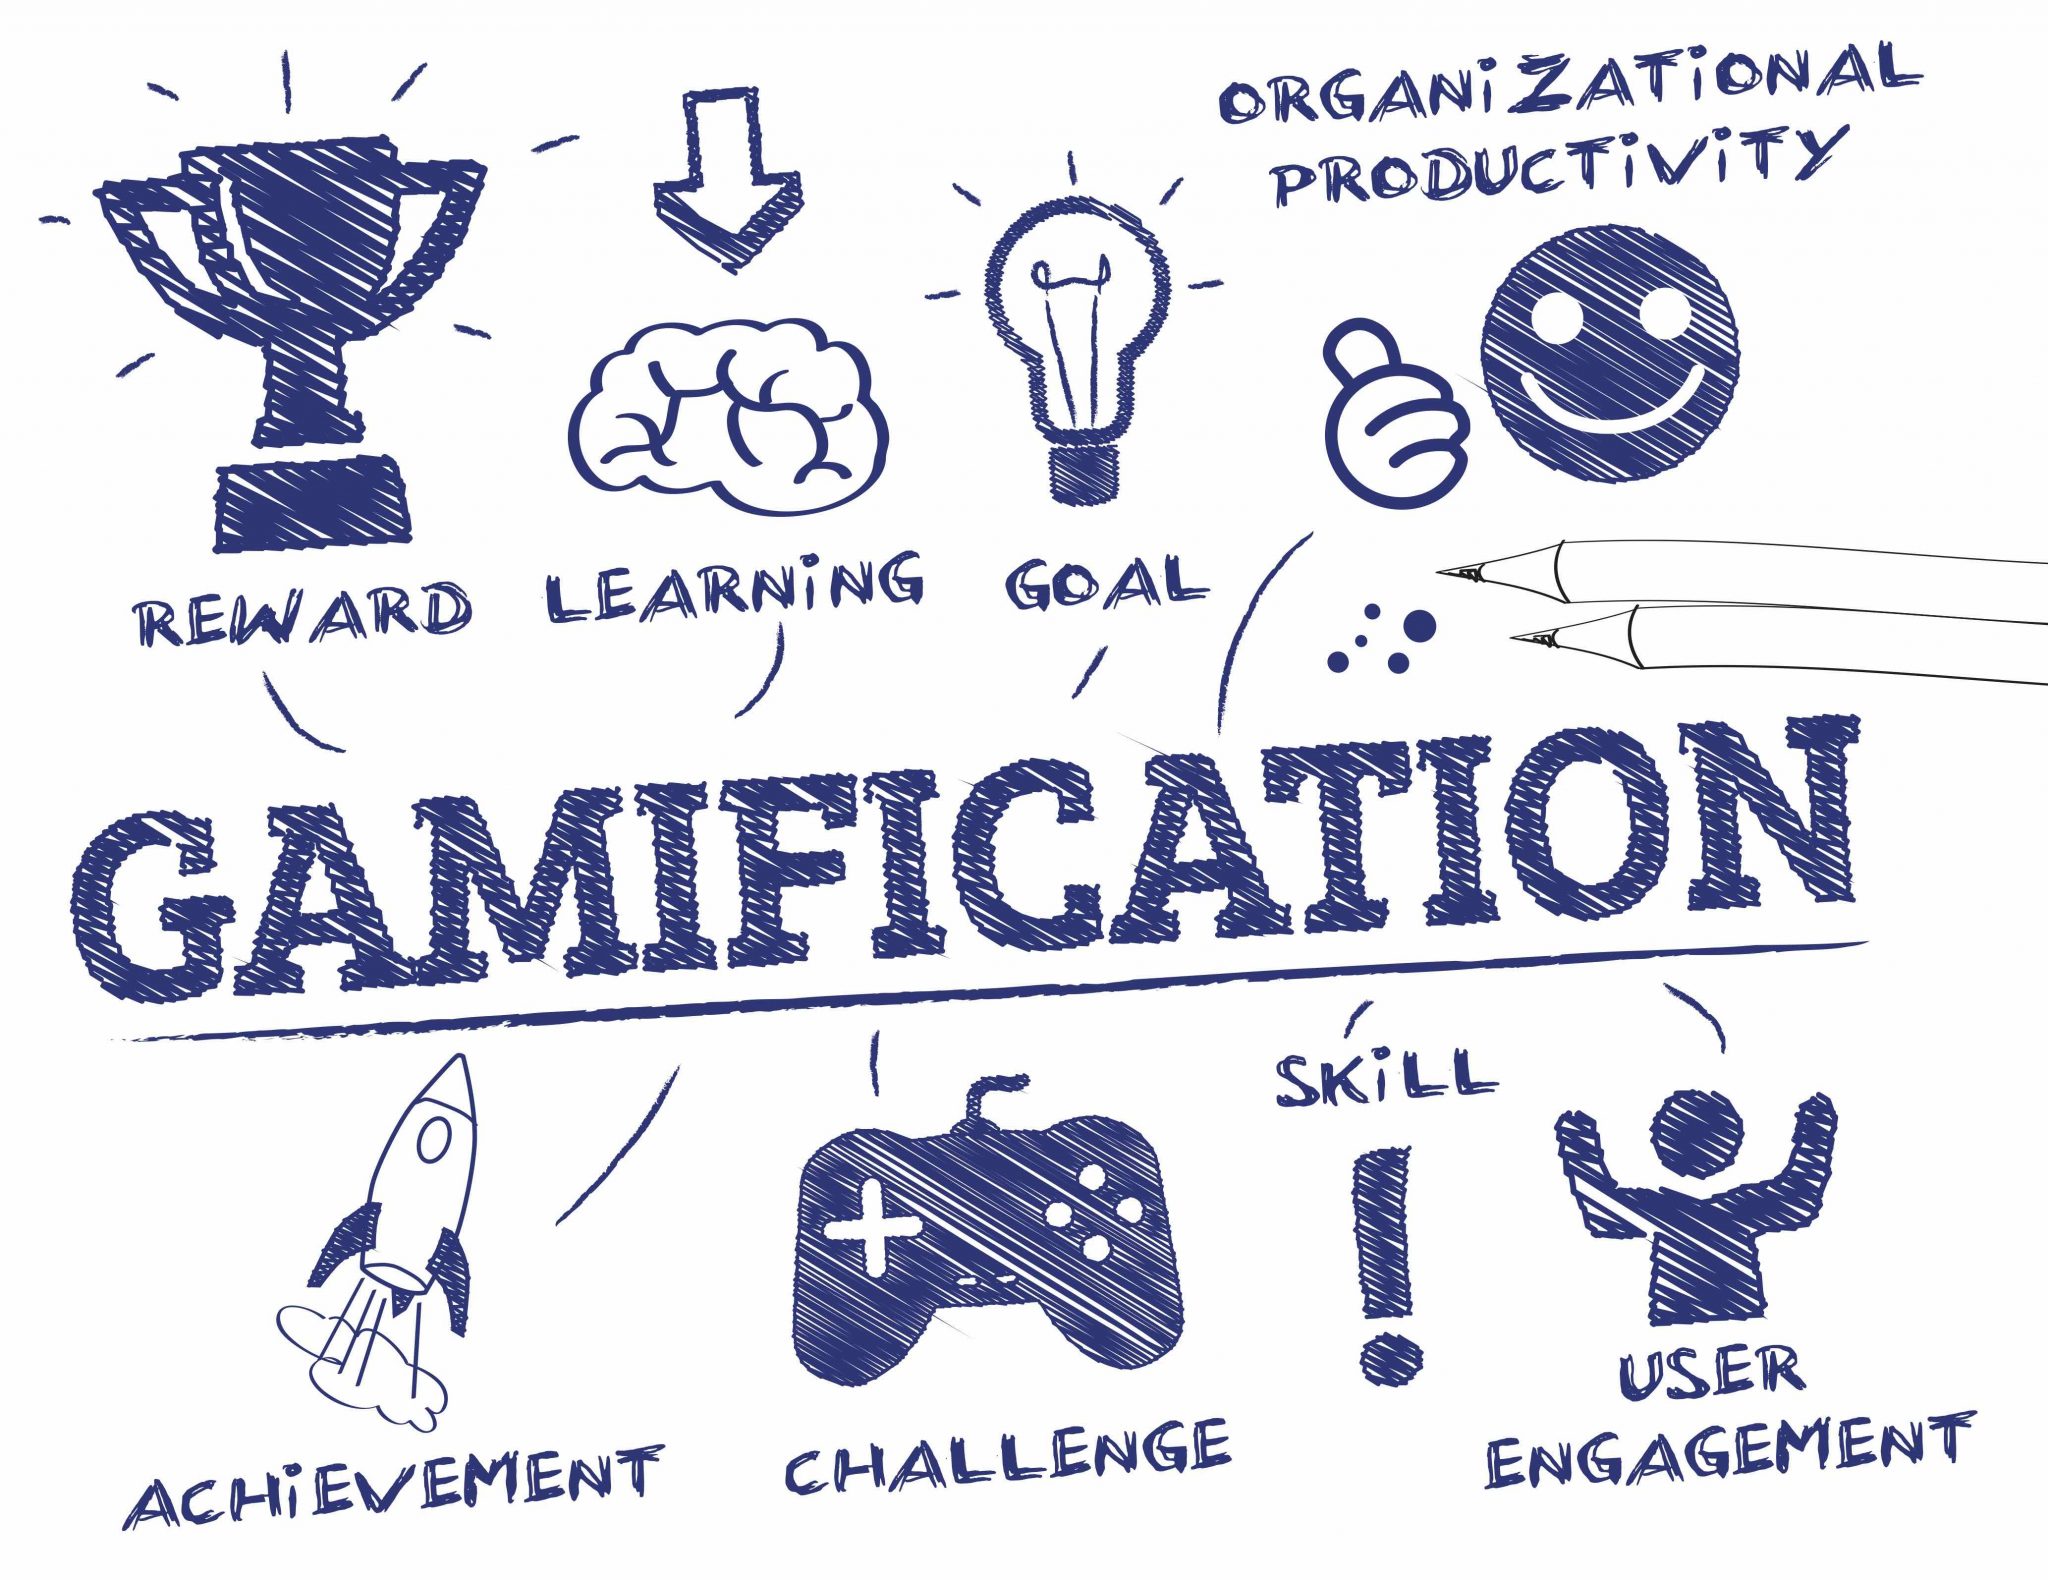 technology in education gamification